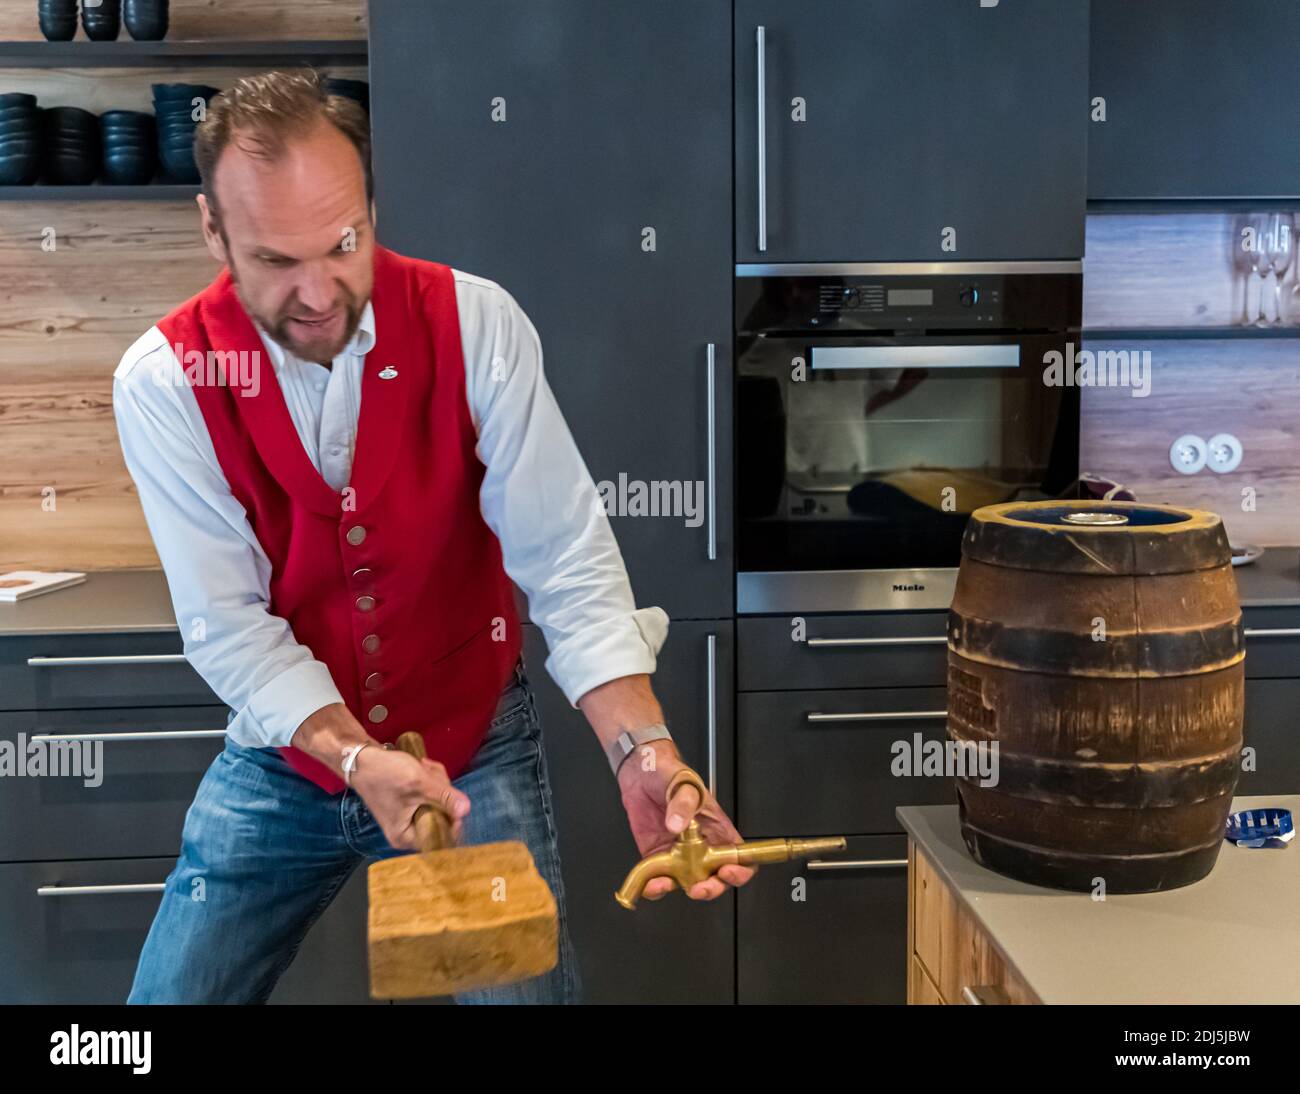 Tapping a beer keg in Kemnath-Waldeck, Germany Stock Photo